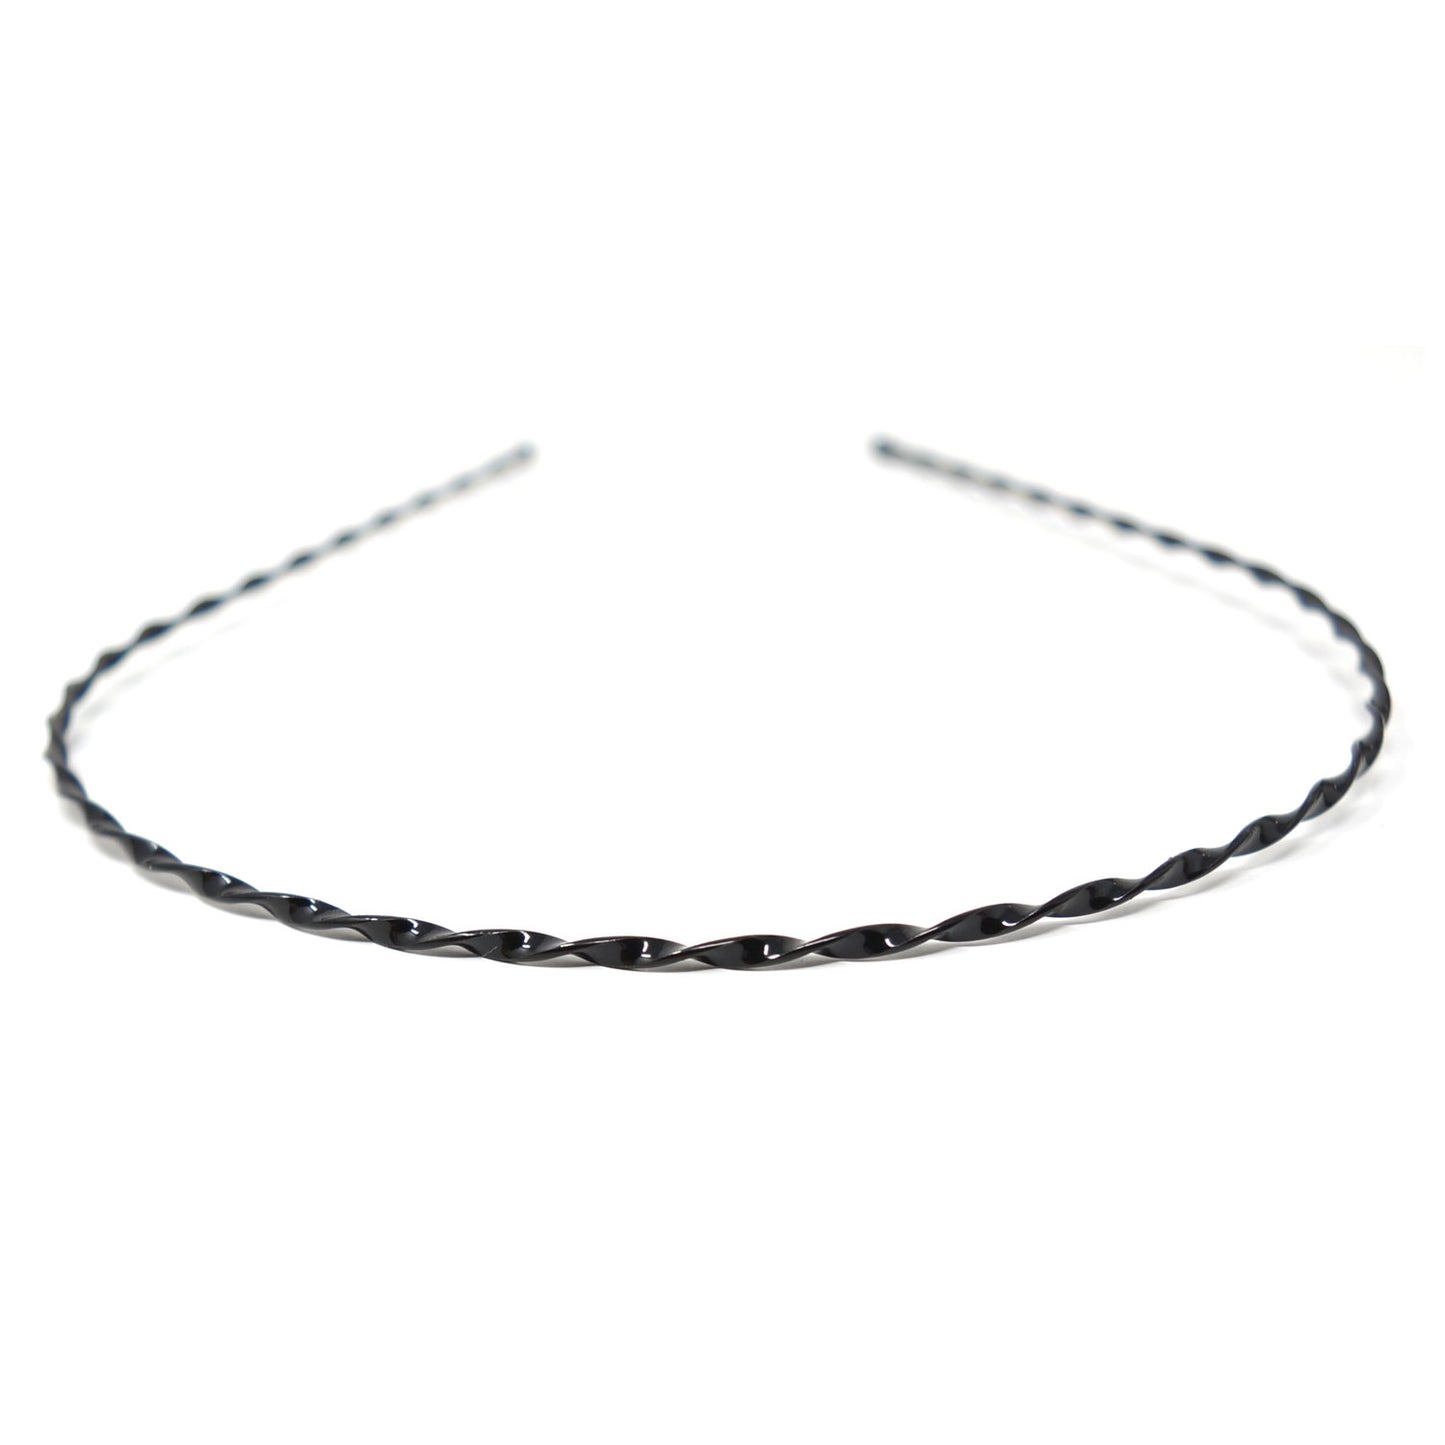 Twisted Metal Black Hair Band for Men and Women (BG-002)